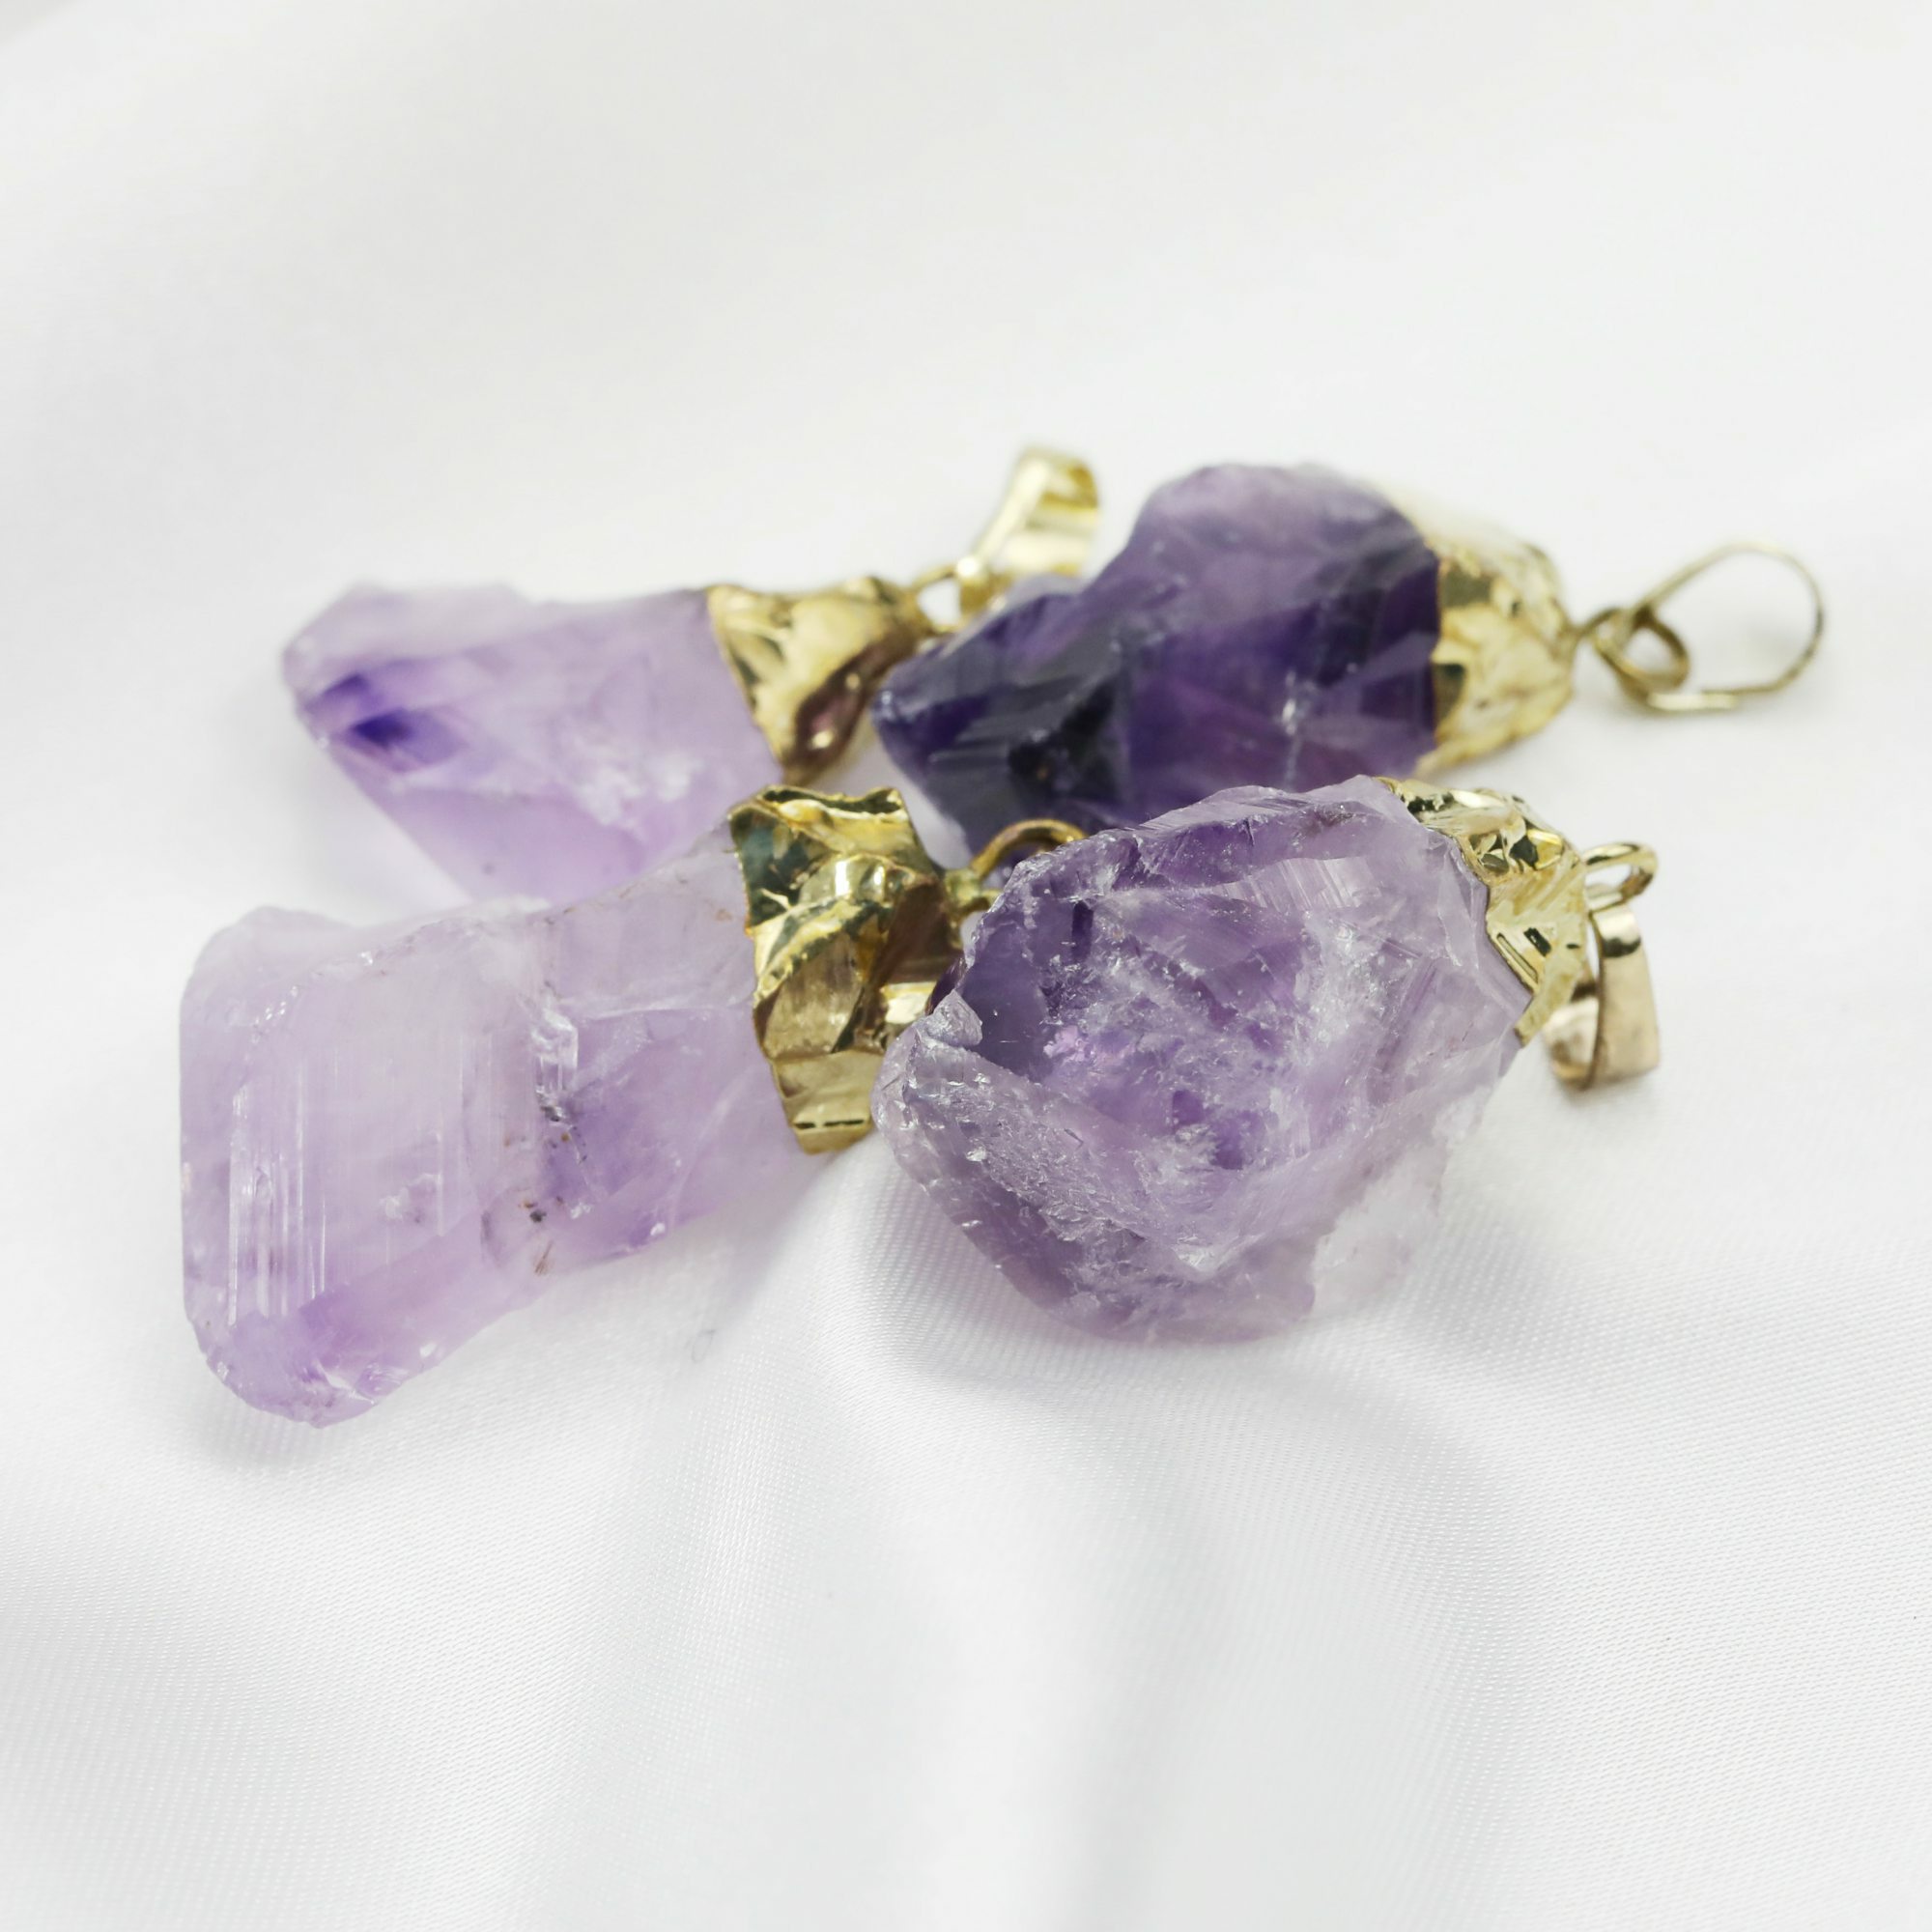 5pcs Nature Raw Amethyst Rock Pendant Charm Stone with Light Gold Plated Bail DIY Jewelry Supplies 1800525 - Click Image to Close